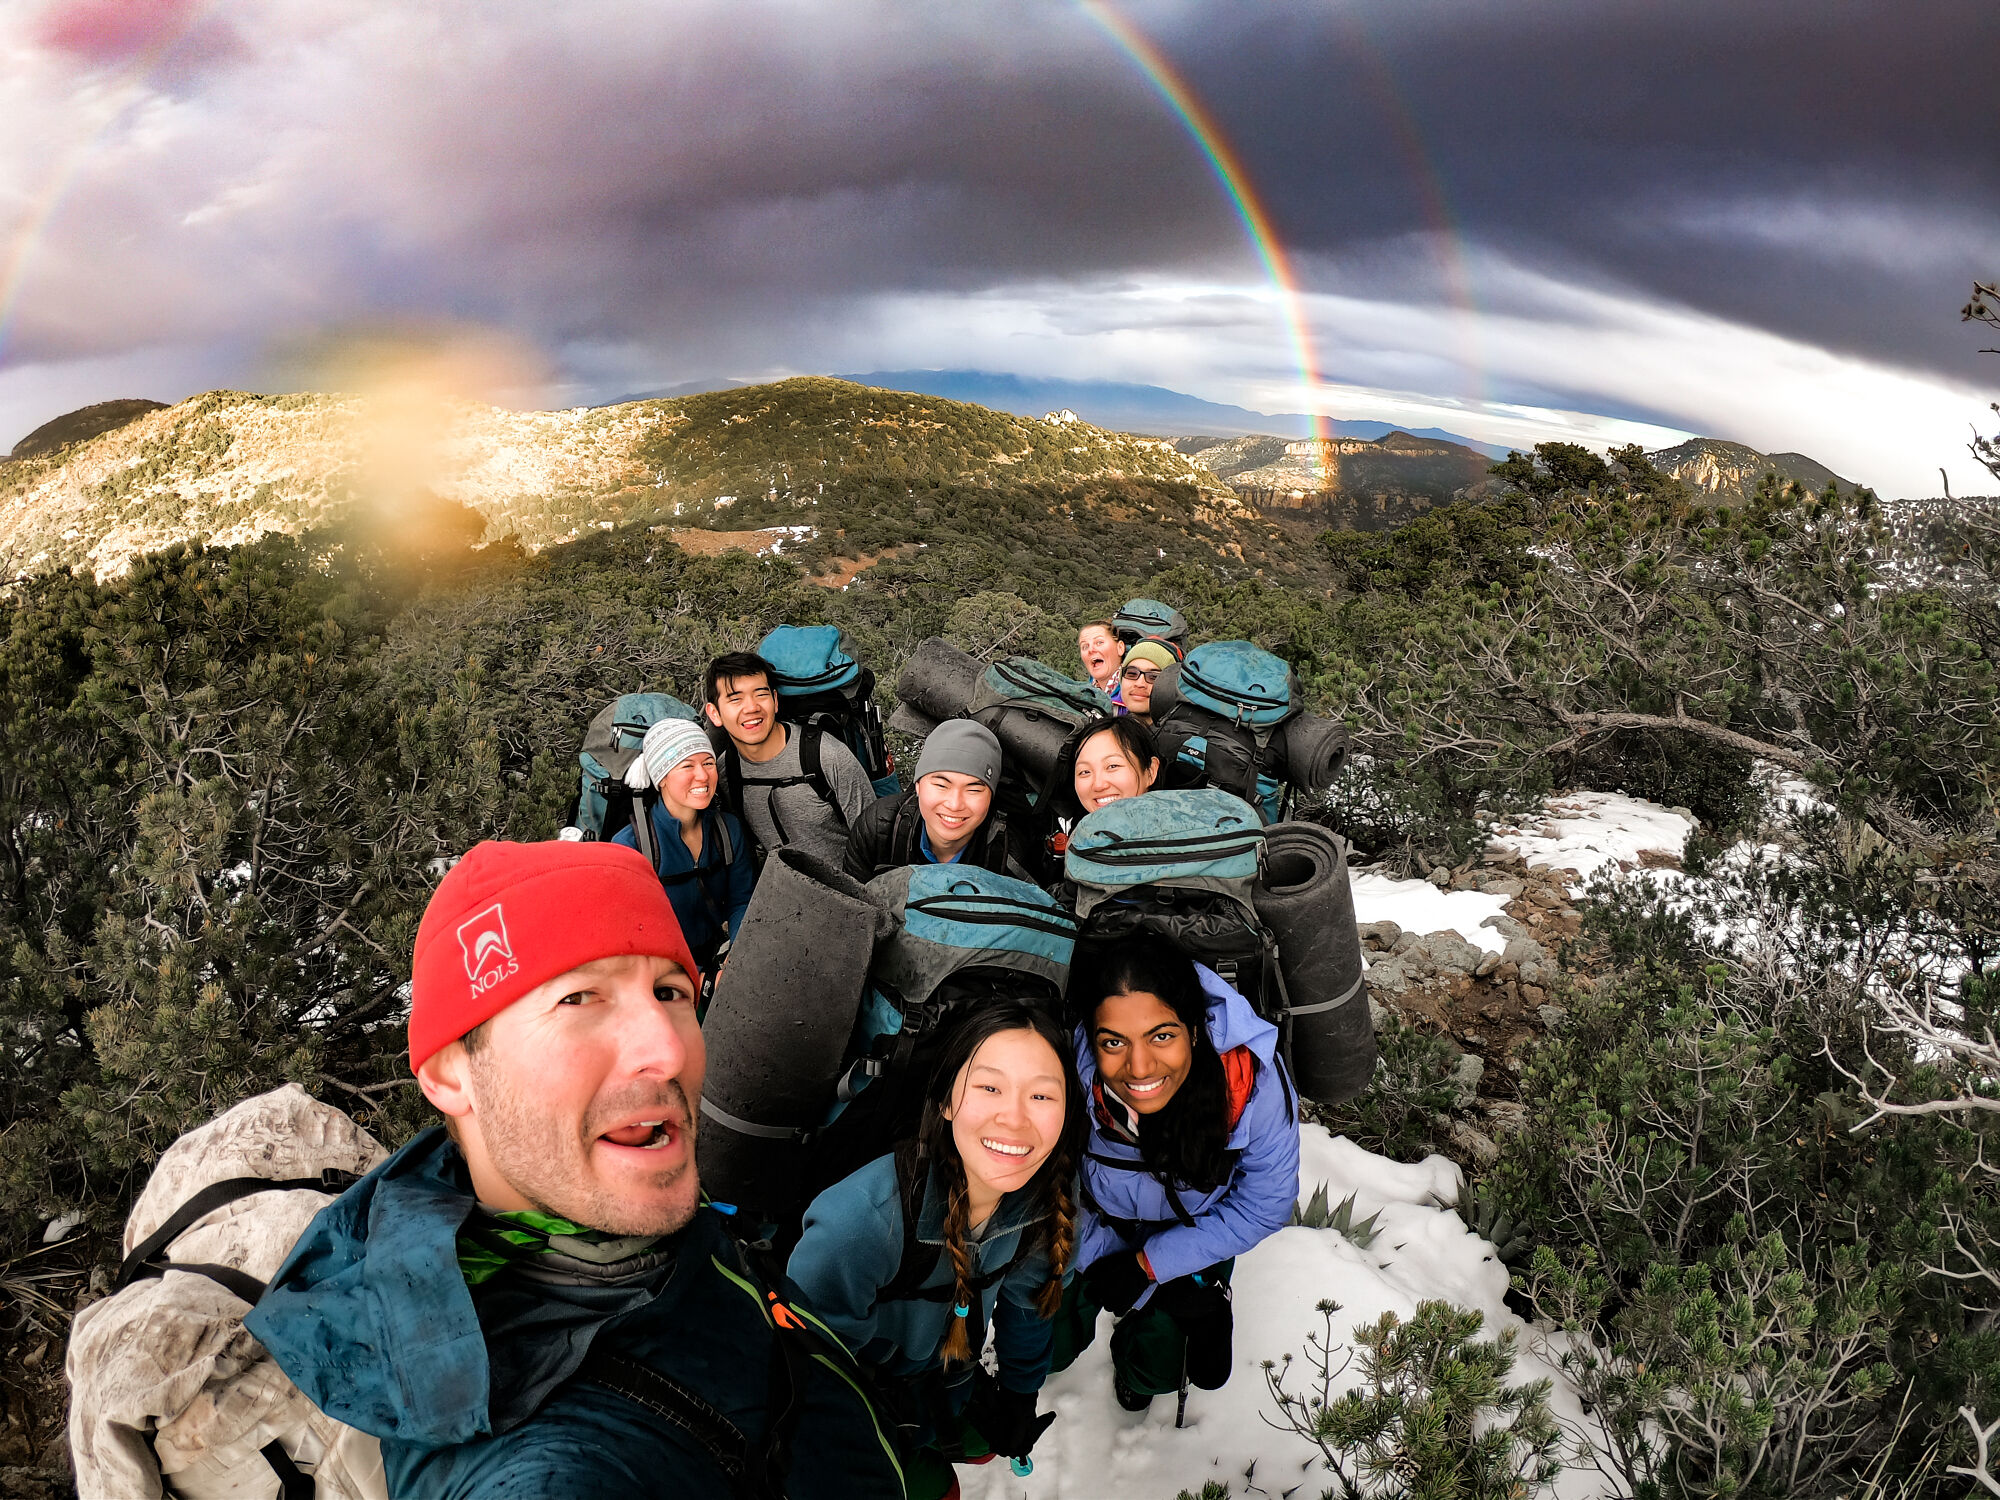 Selfie shot of a group of smiling backpackers with a rainbow in the background